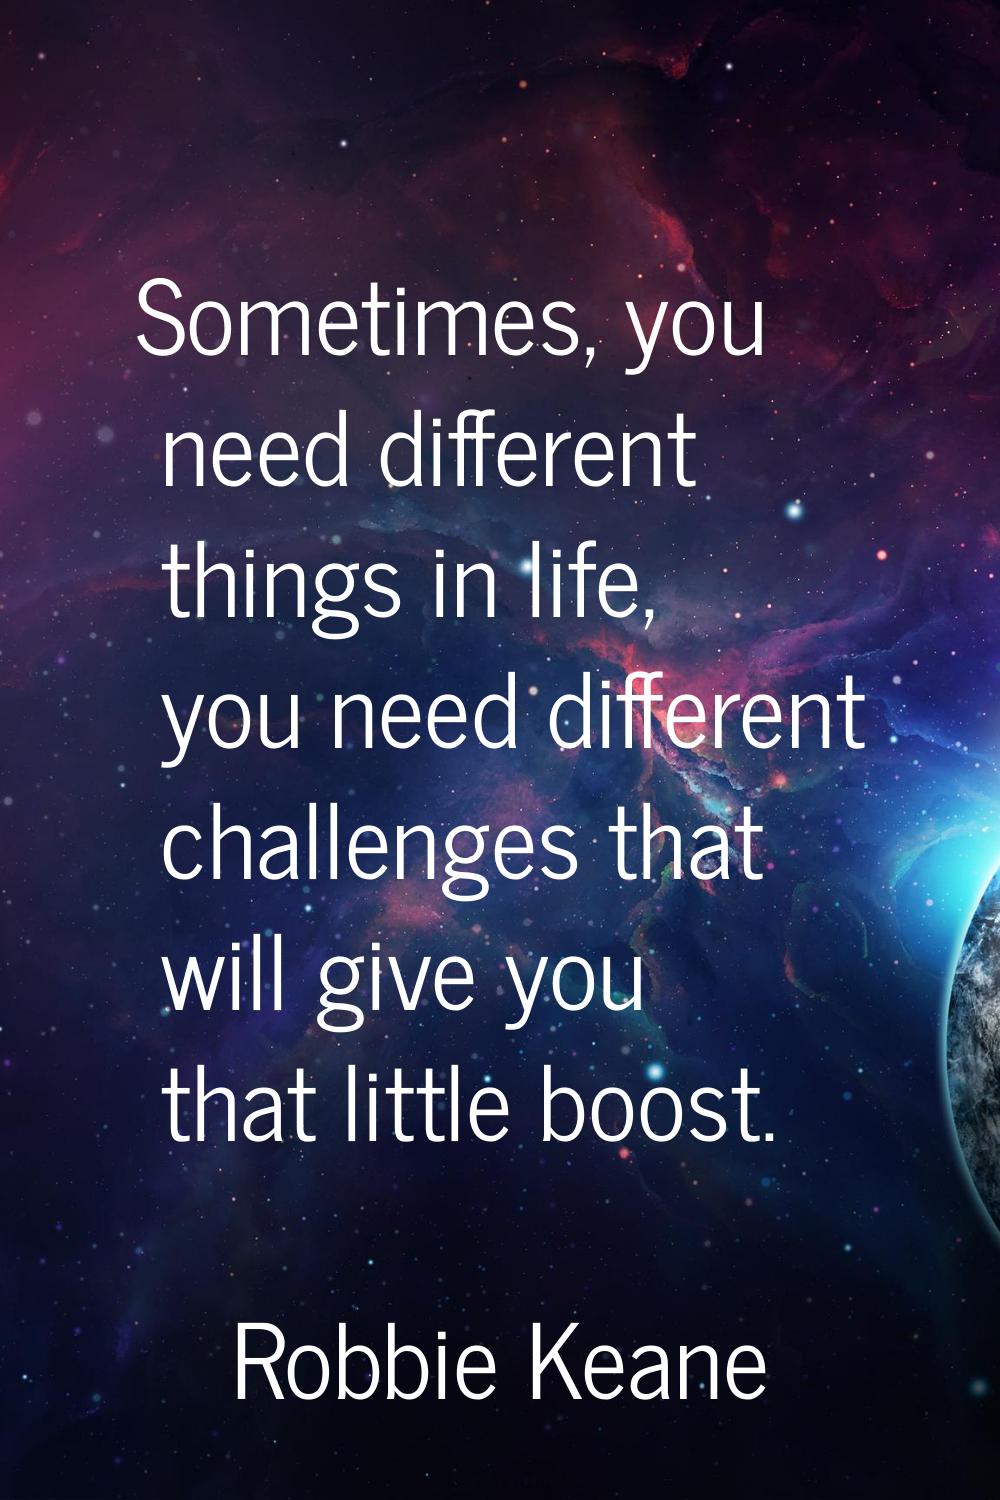 Sometimes, you need different things in life, you need different challenges that will give you that